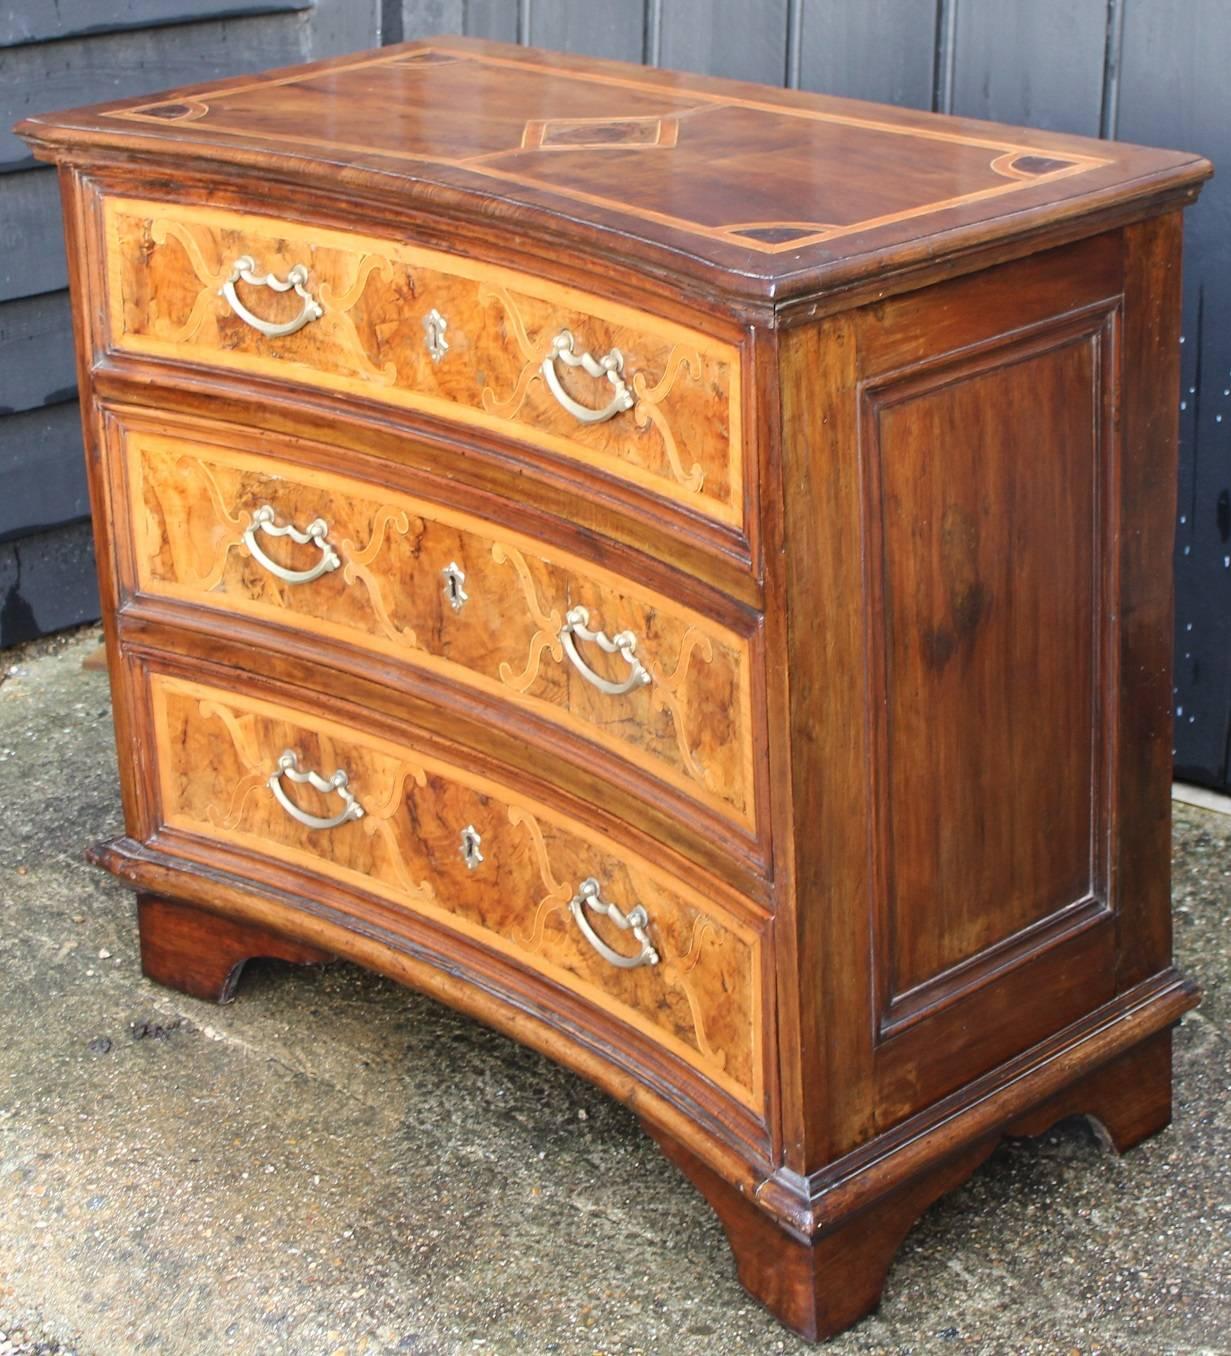 Rare mid-18th century Italian concave fronted commode, Lombardy region, possible made in Brescia, with walnut veneer and marquetry inlay to top and drawers, the inlay possible sycamore, on bracket feet, with original handles and locks.